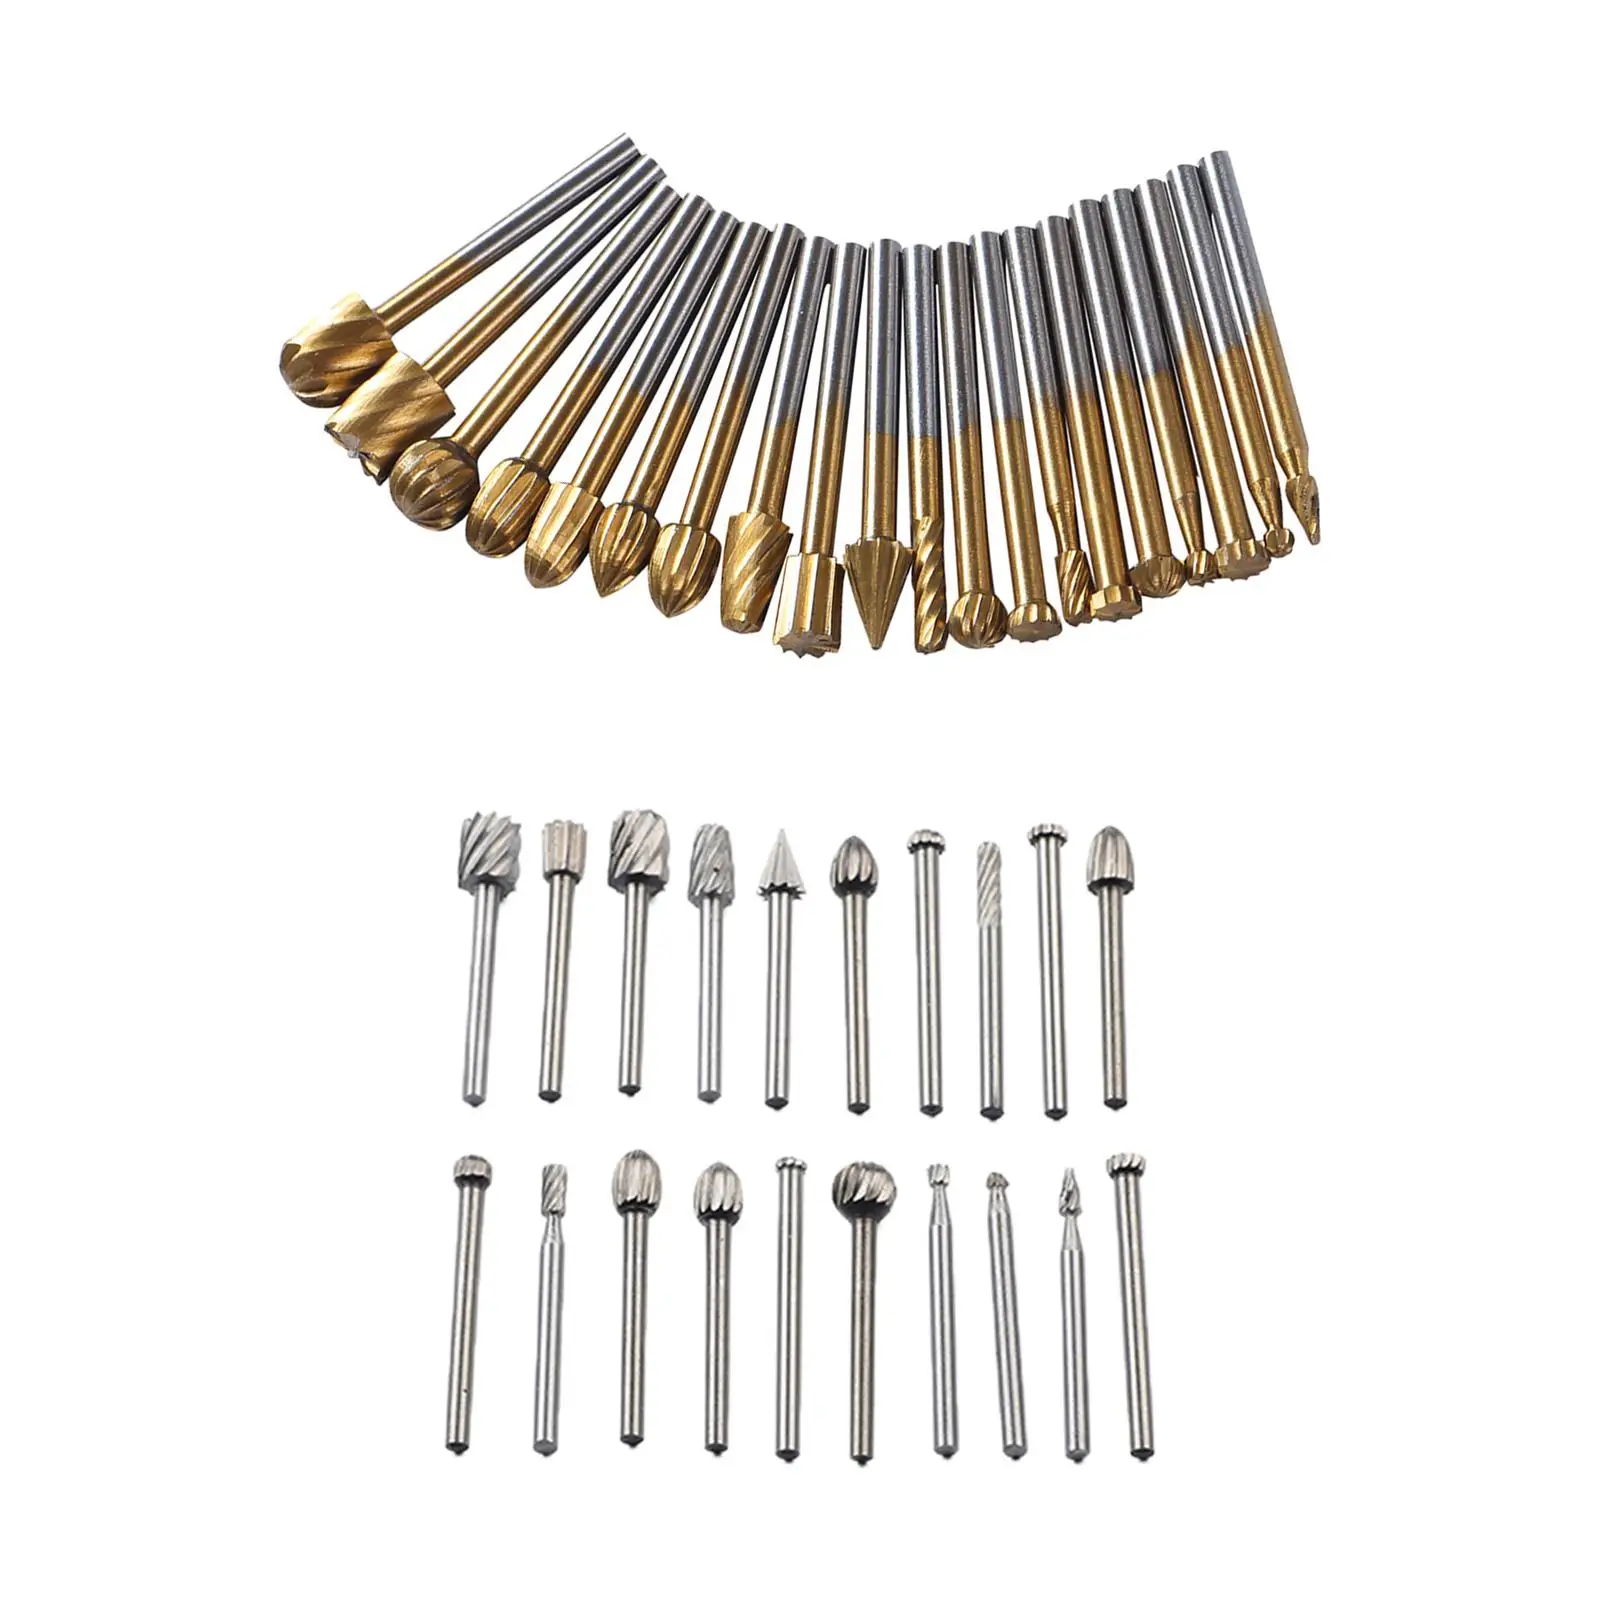 20Pcs Rotary Drill Set, Engraving Bits Metal Grinding Cutting Burr Bit for DIY Woodworking